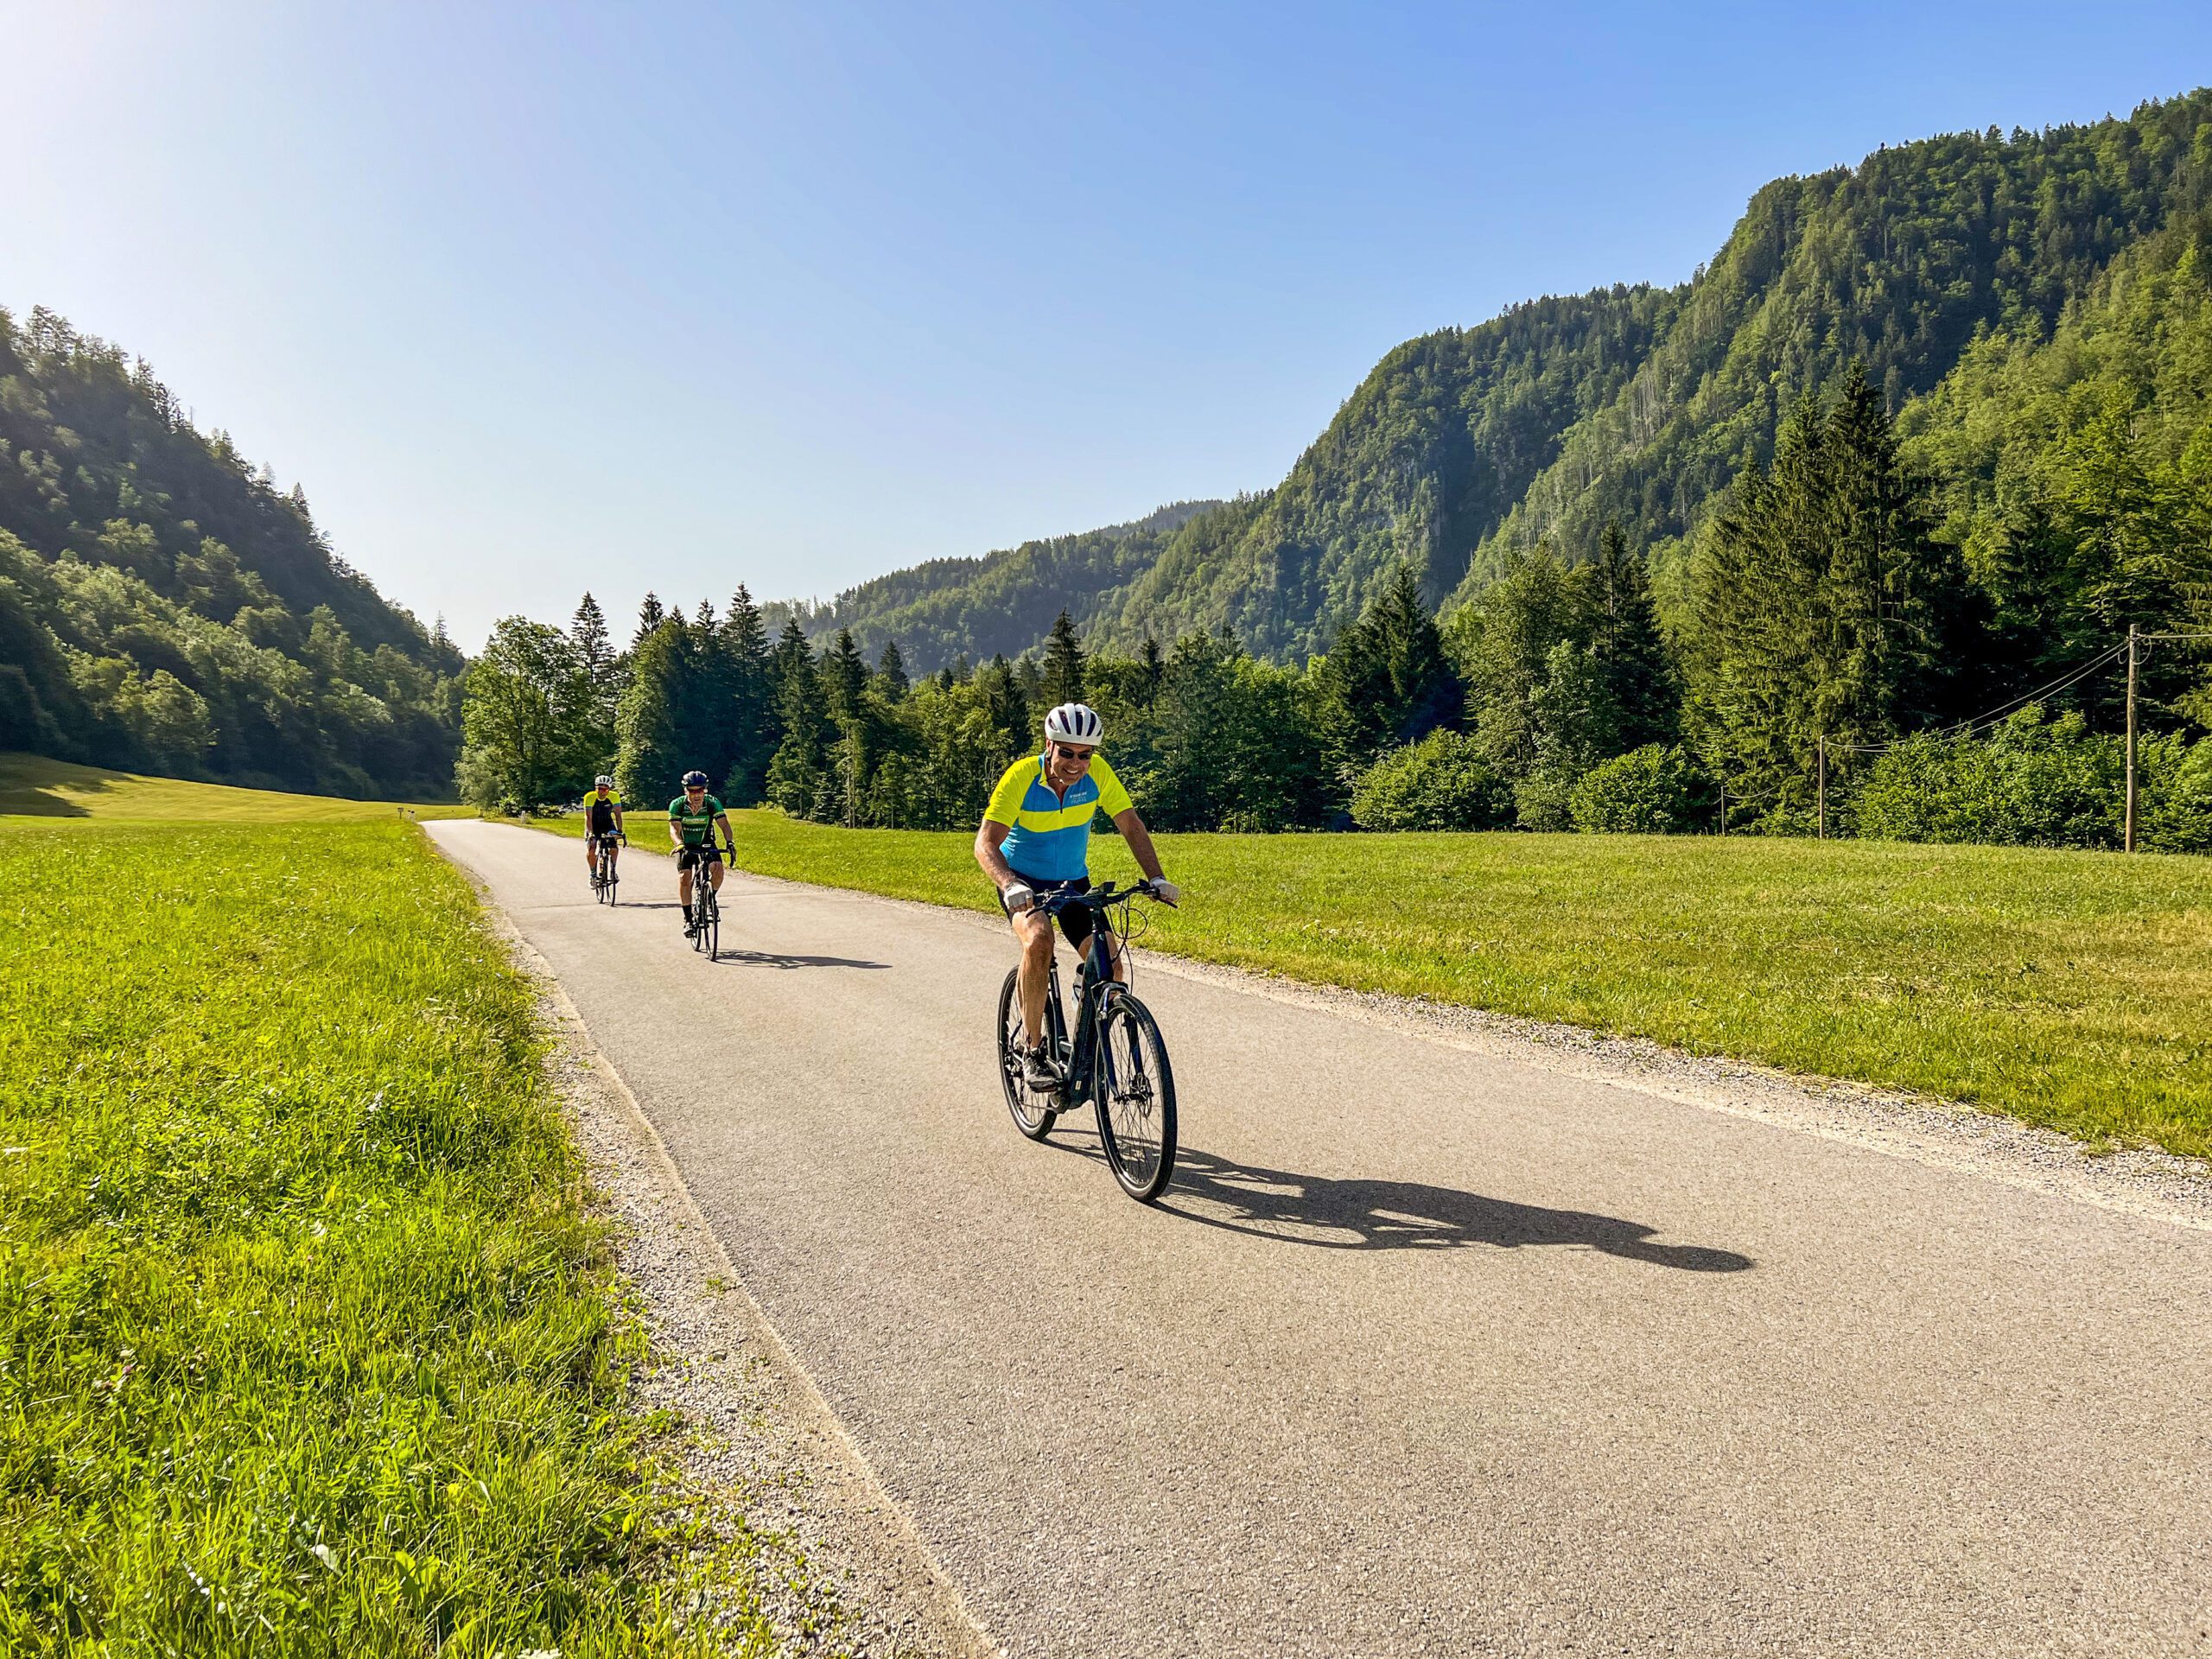 3 cyclists riding their bikes on a paved road in Slovenia